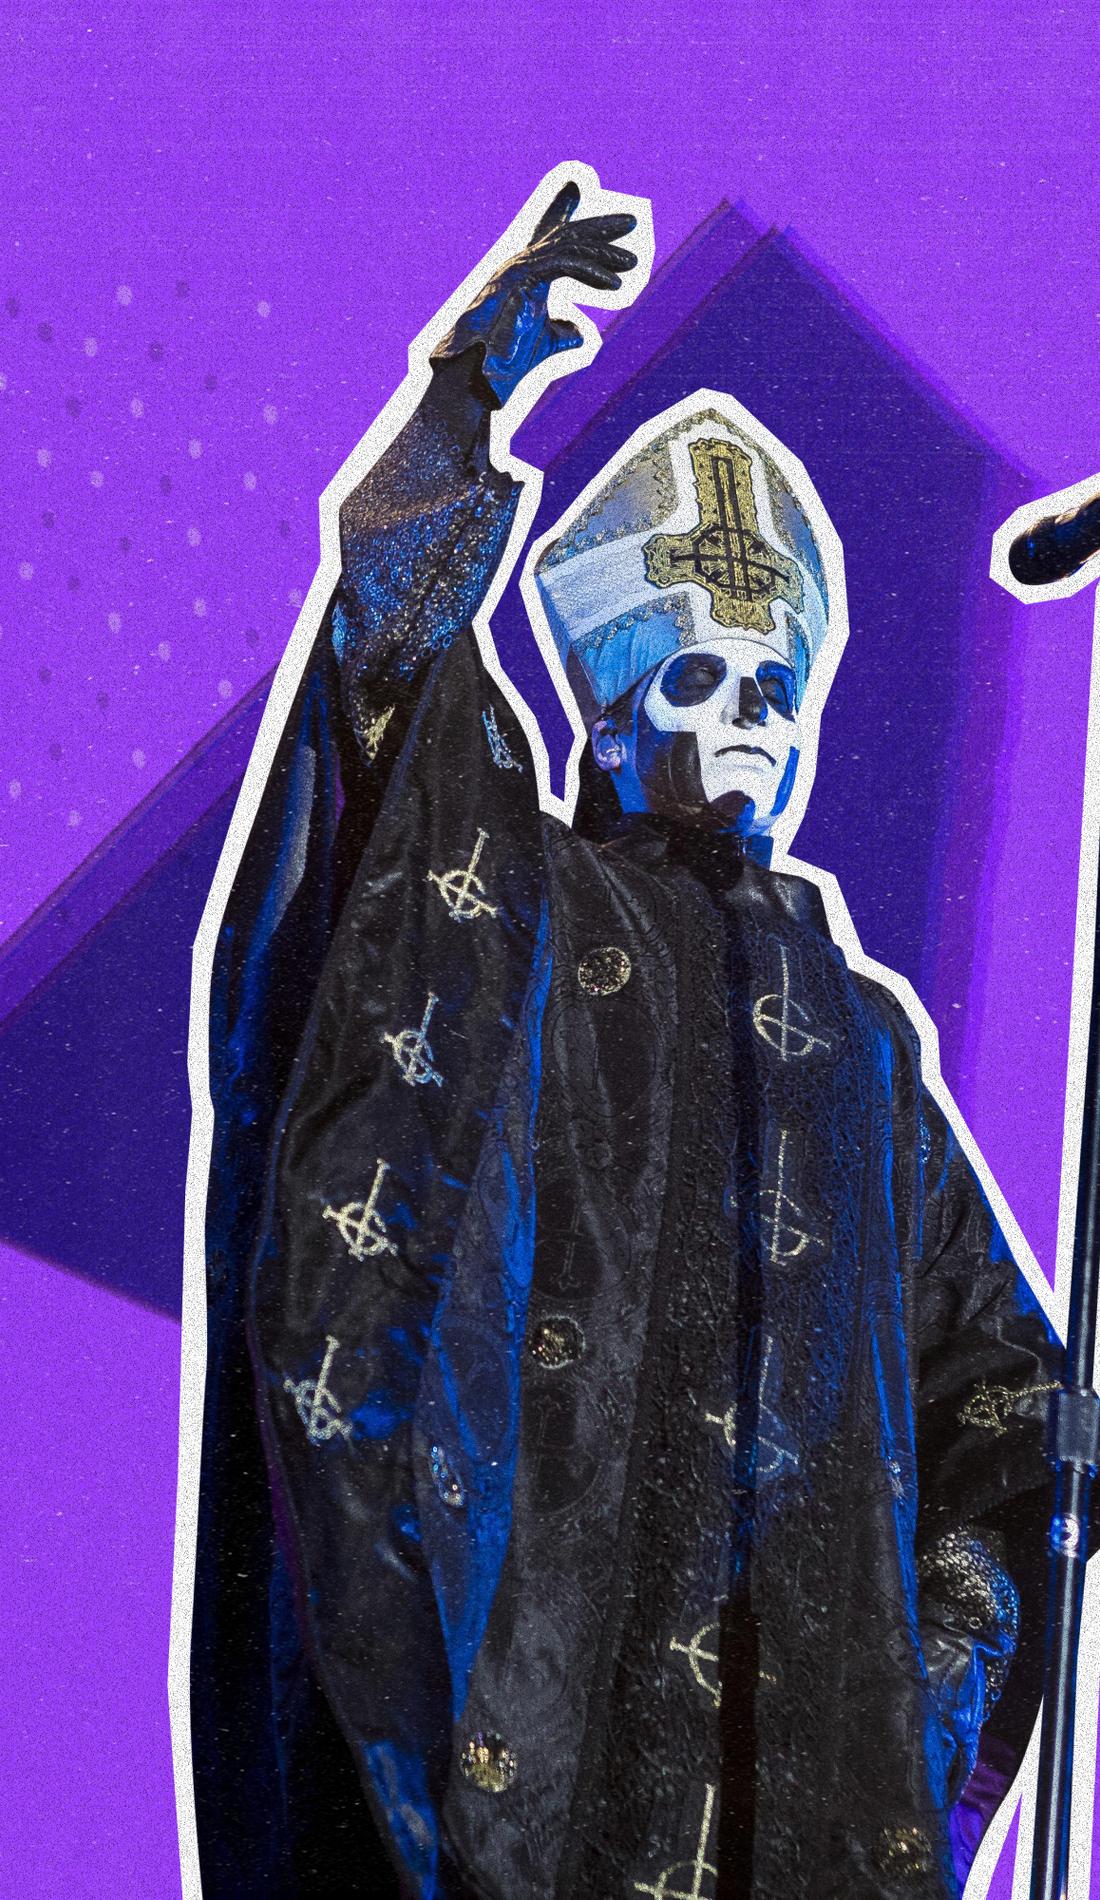 GHOST Tickets, 2023 Concert Tour Dates